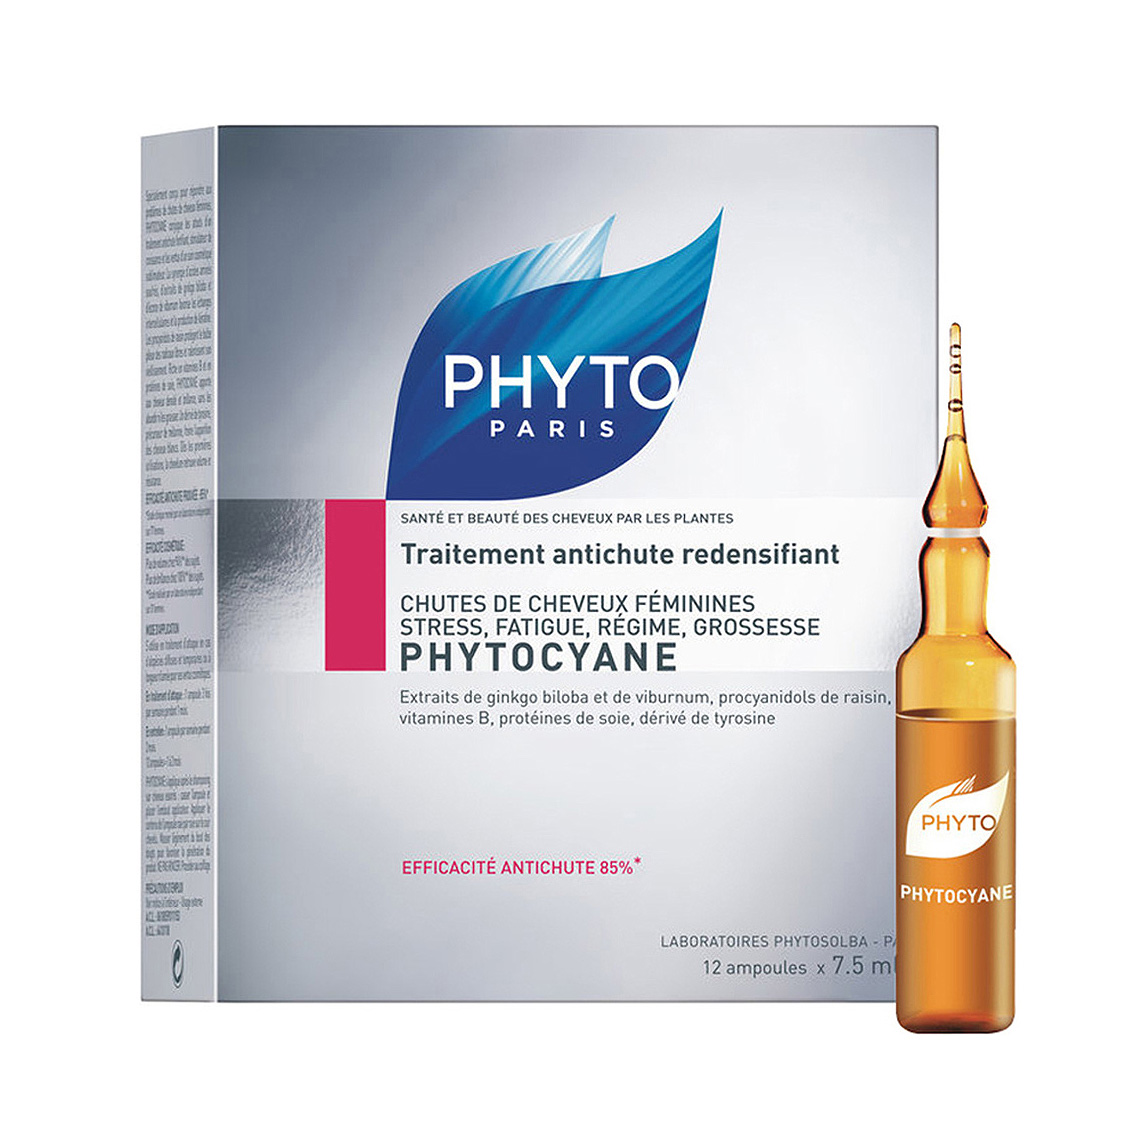 Phyto revitalizing serum, available to buy in store at The Mane House in Biddenden.